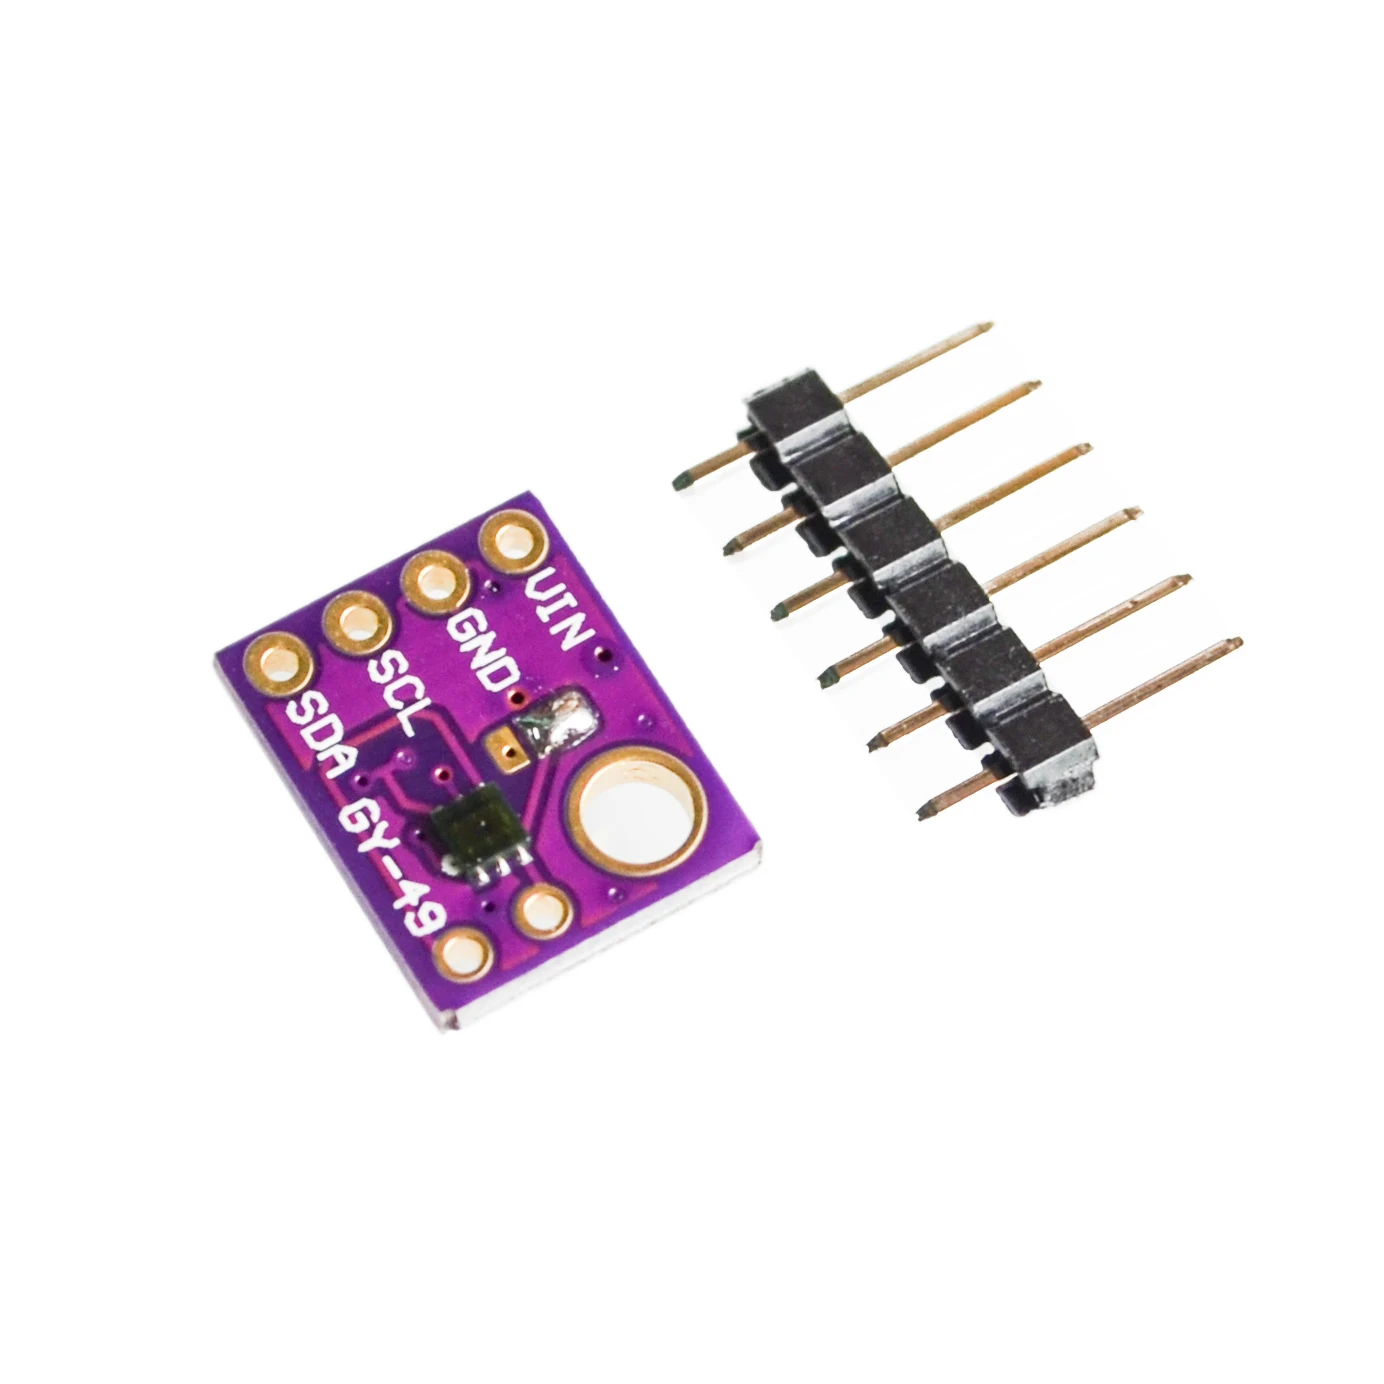 MAX44009 GY-49 Ambient Light Sensor Module Arduino with 4P Pin Header 